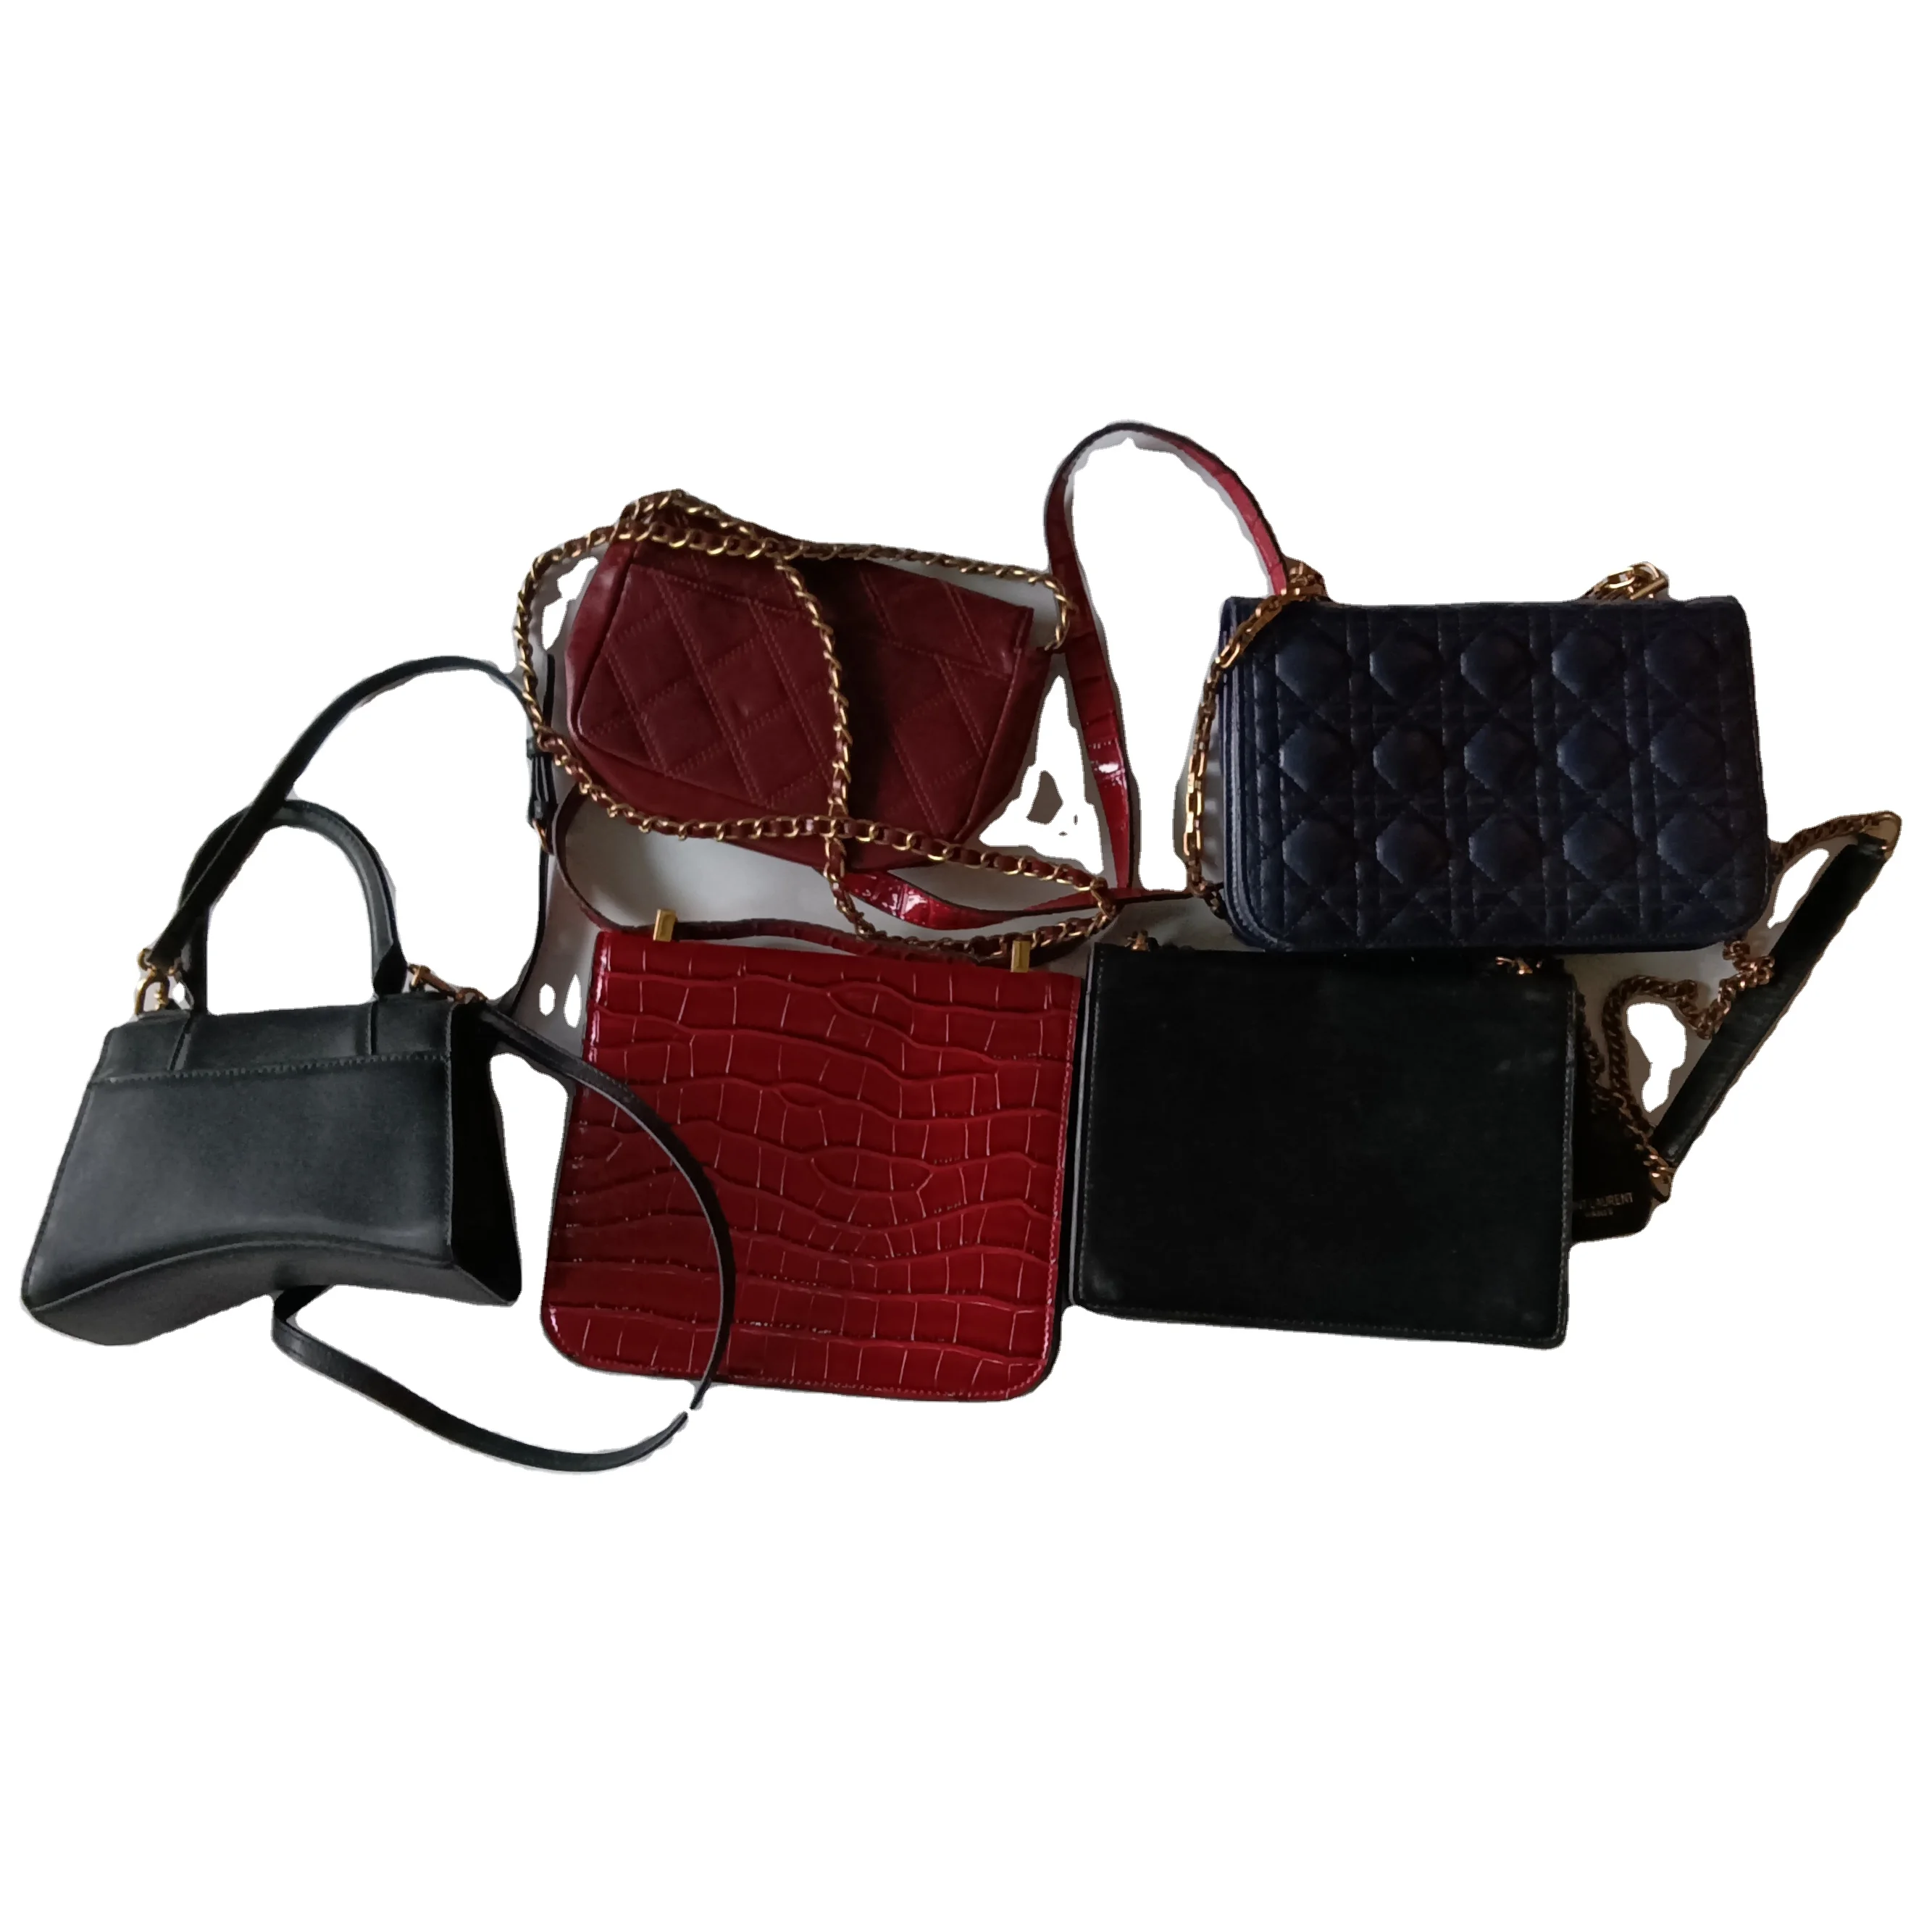 

Famous fashion design second-hand bags luxury branded used handbags for ladies in bales, Mixed color